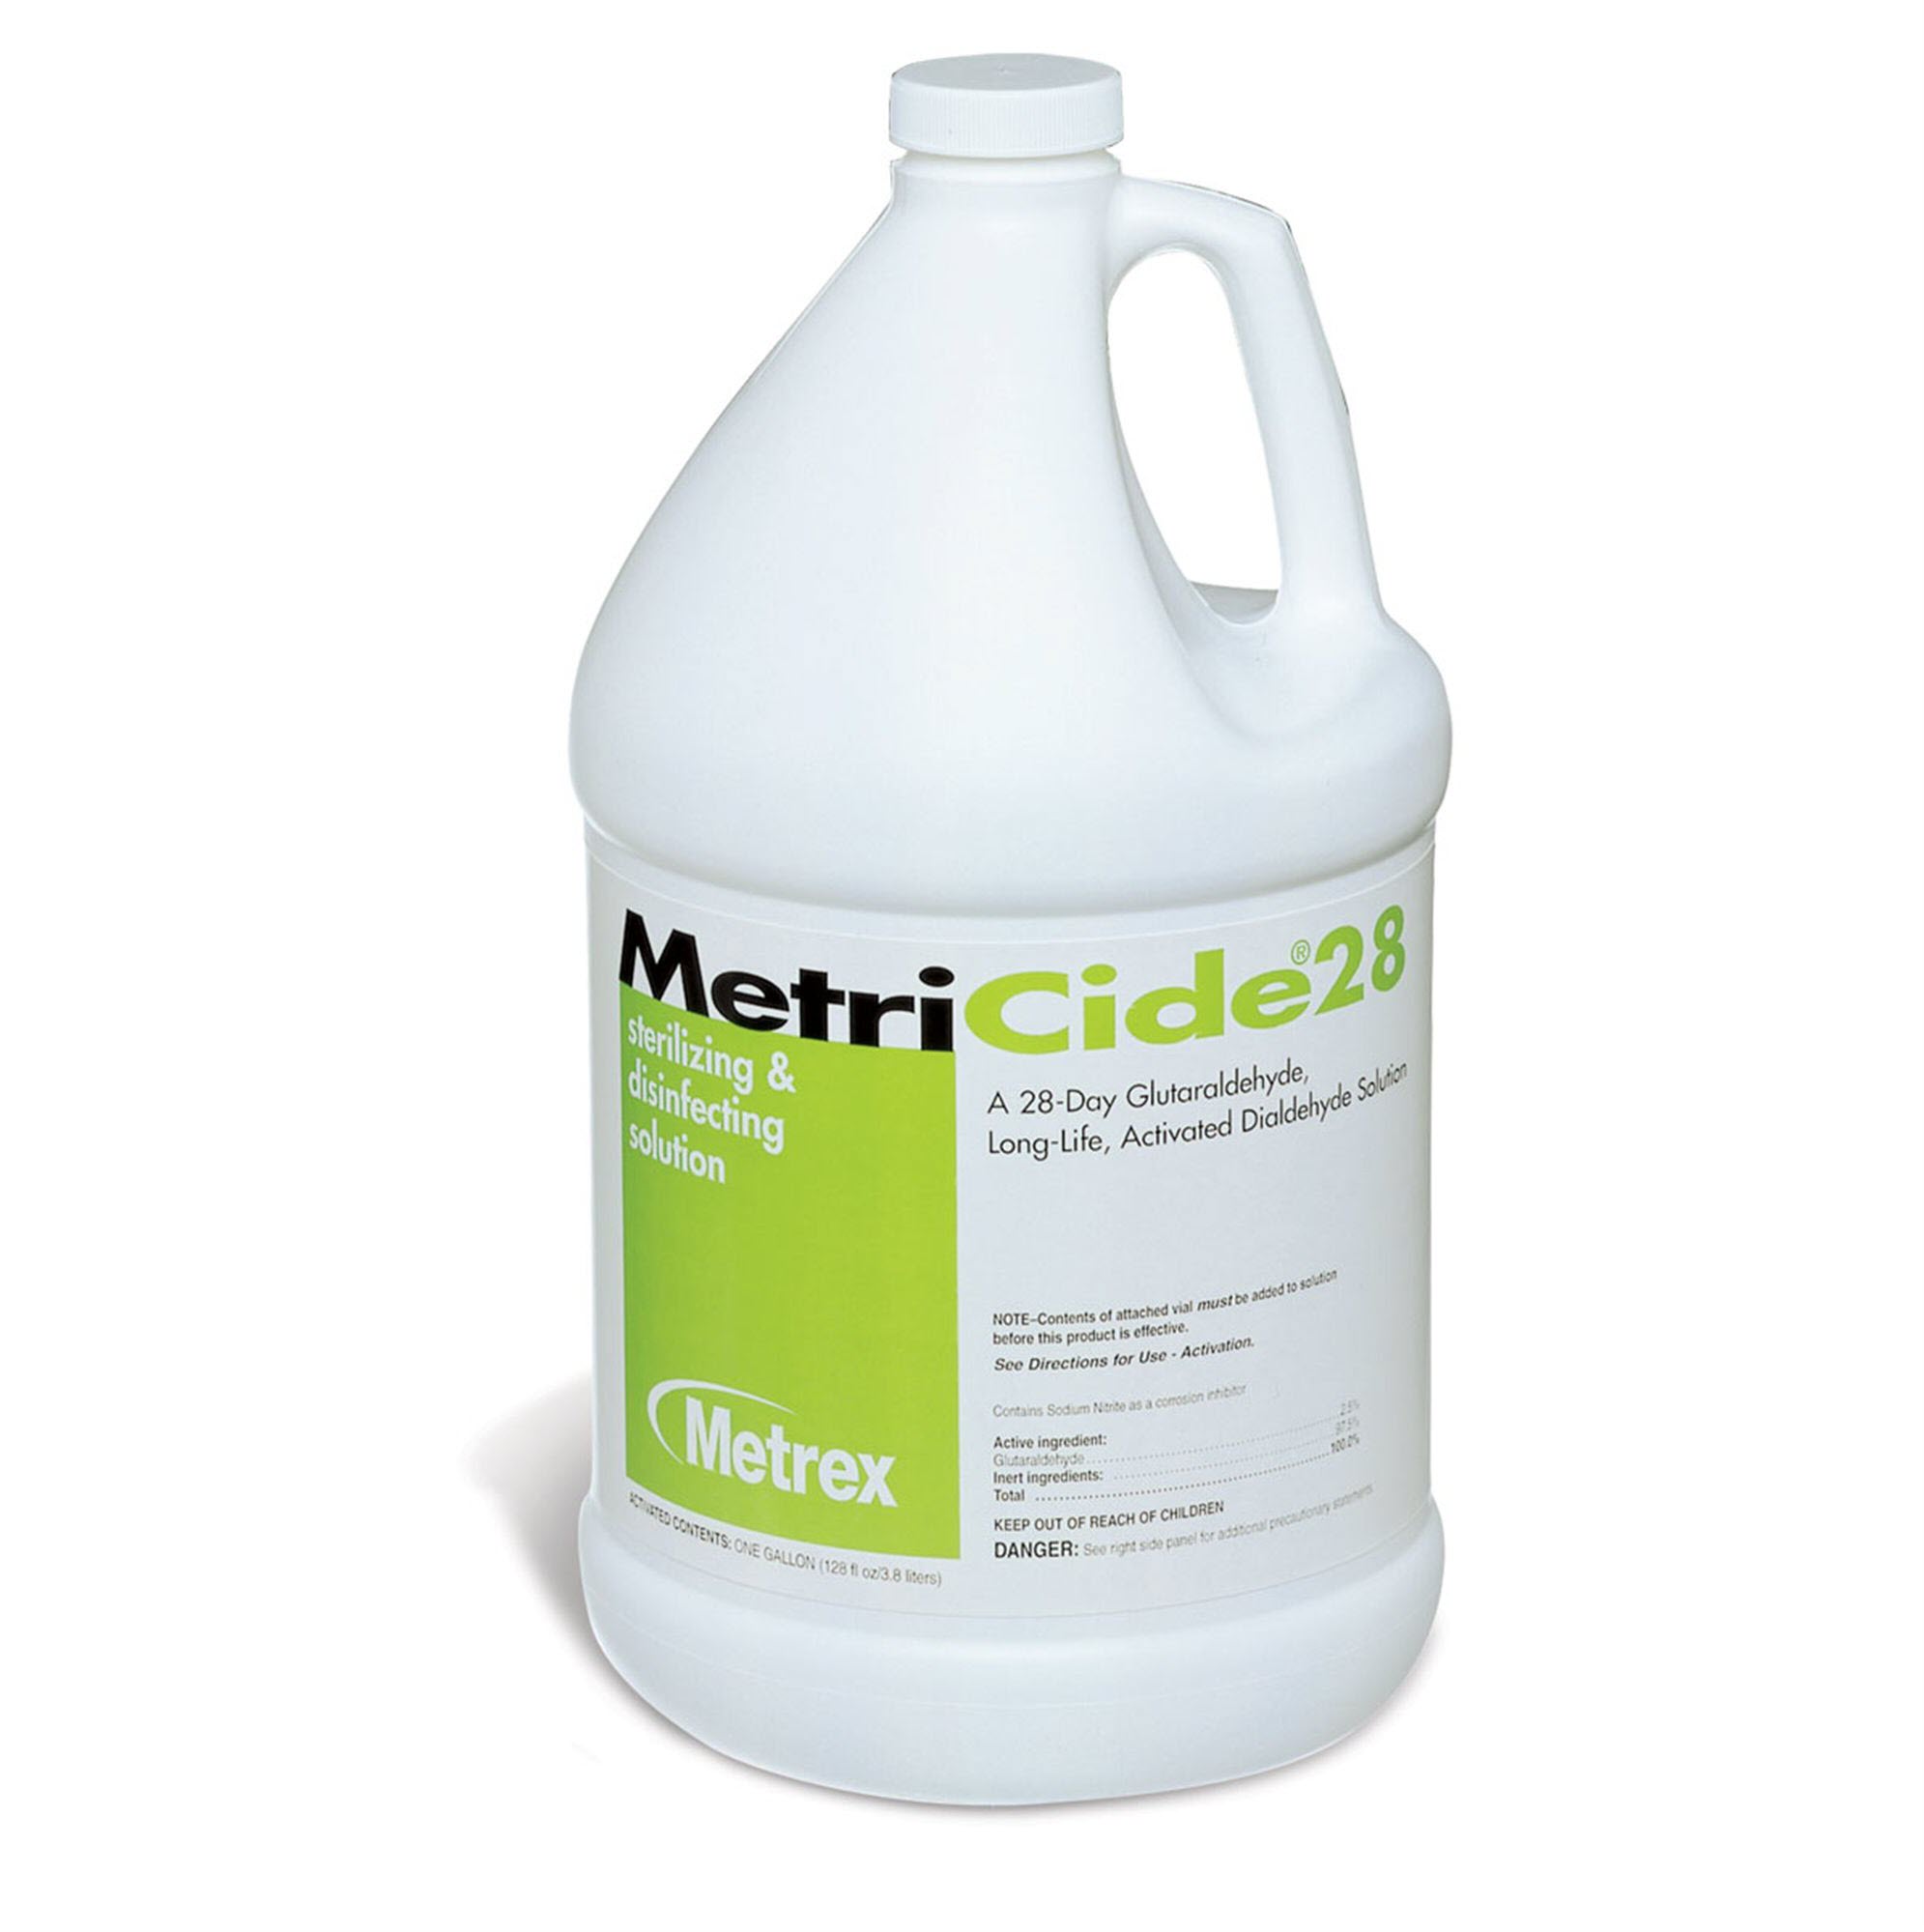 Sterilizing and Disinfecting Solution - MetriCide<sup>&reg;</sup> 28